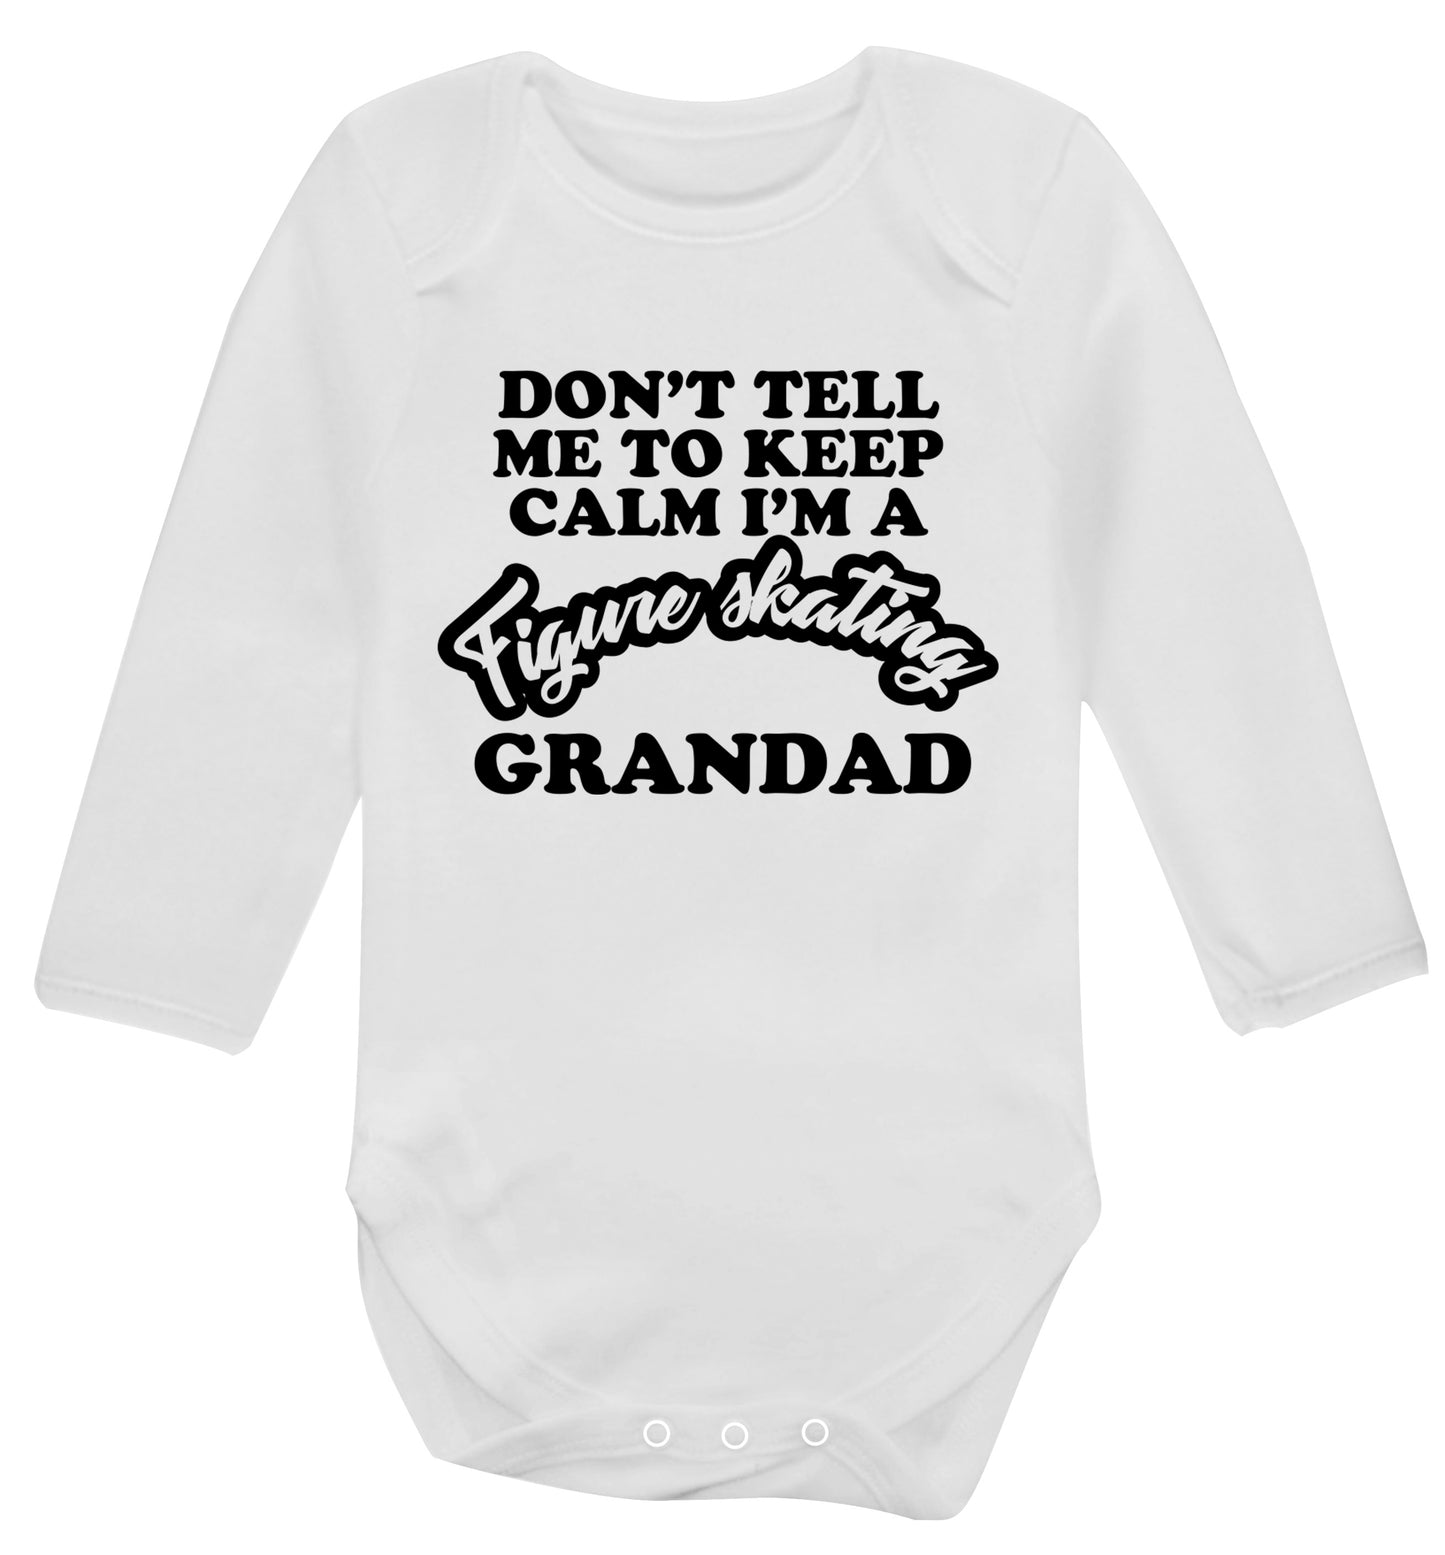 Don't tell me to keep calm I'm a figure skating grandad Baby Vest long sleeved white 6-12 months